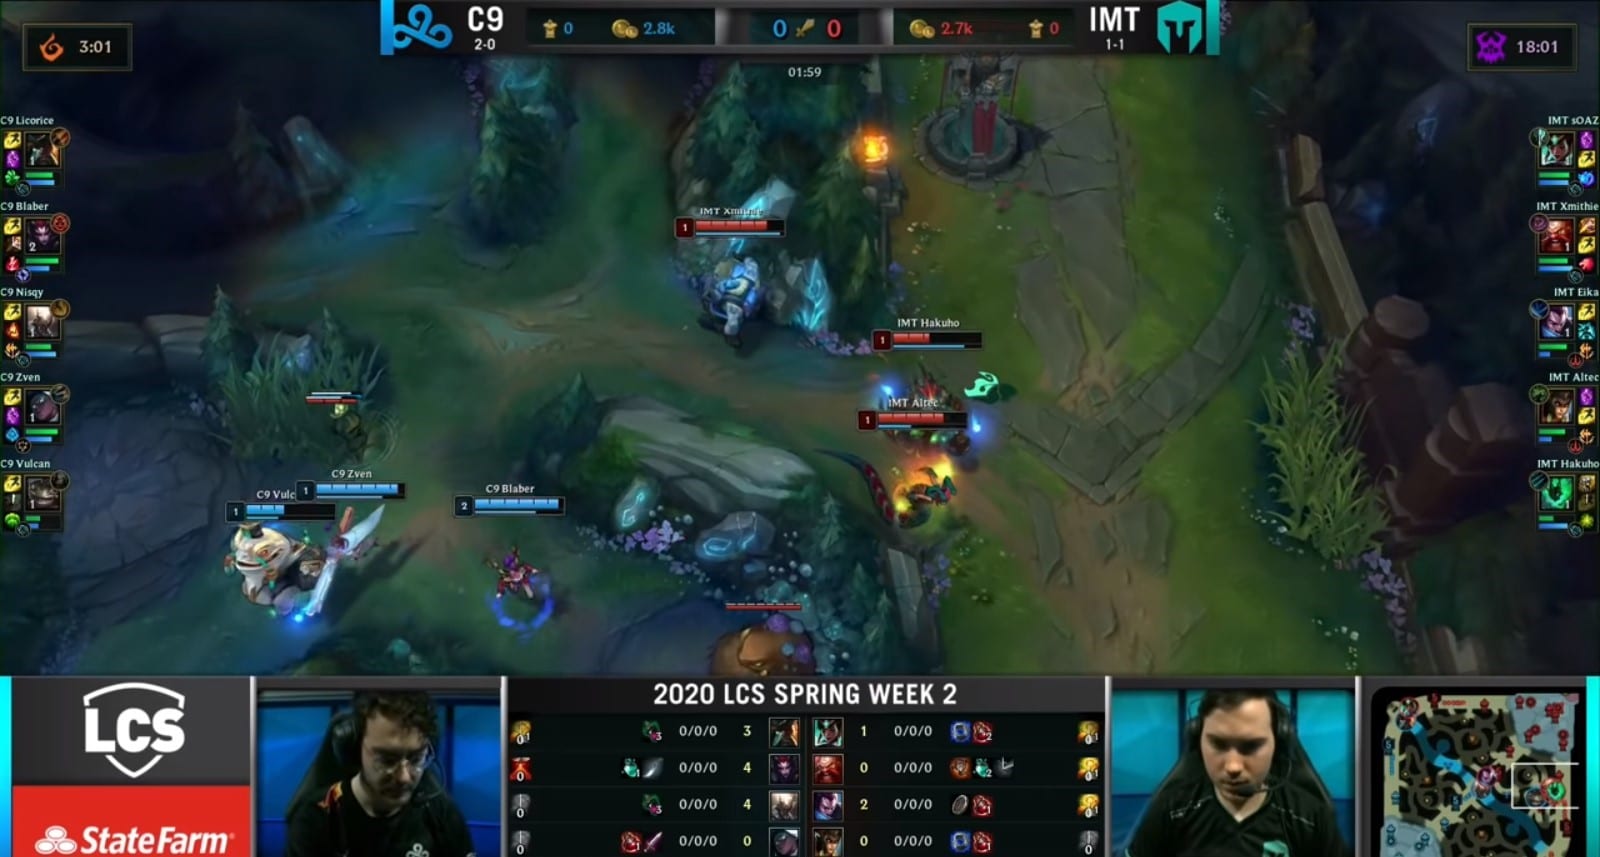 C9 stole Xmithie's blue buff and forced Hakuho's Flash. 